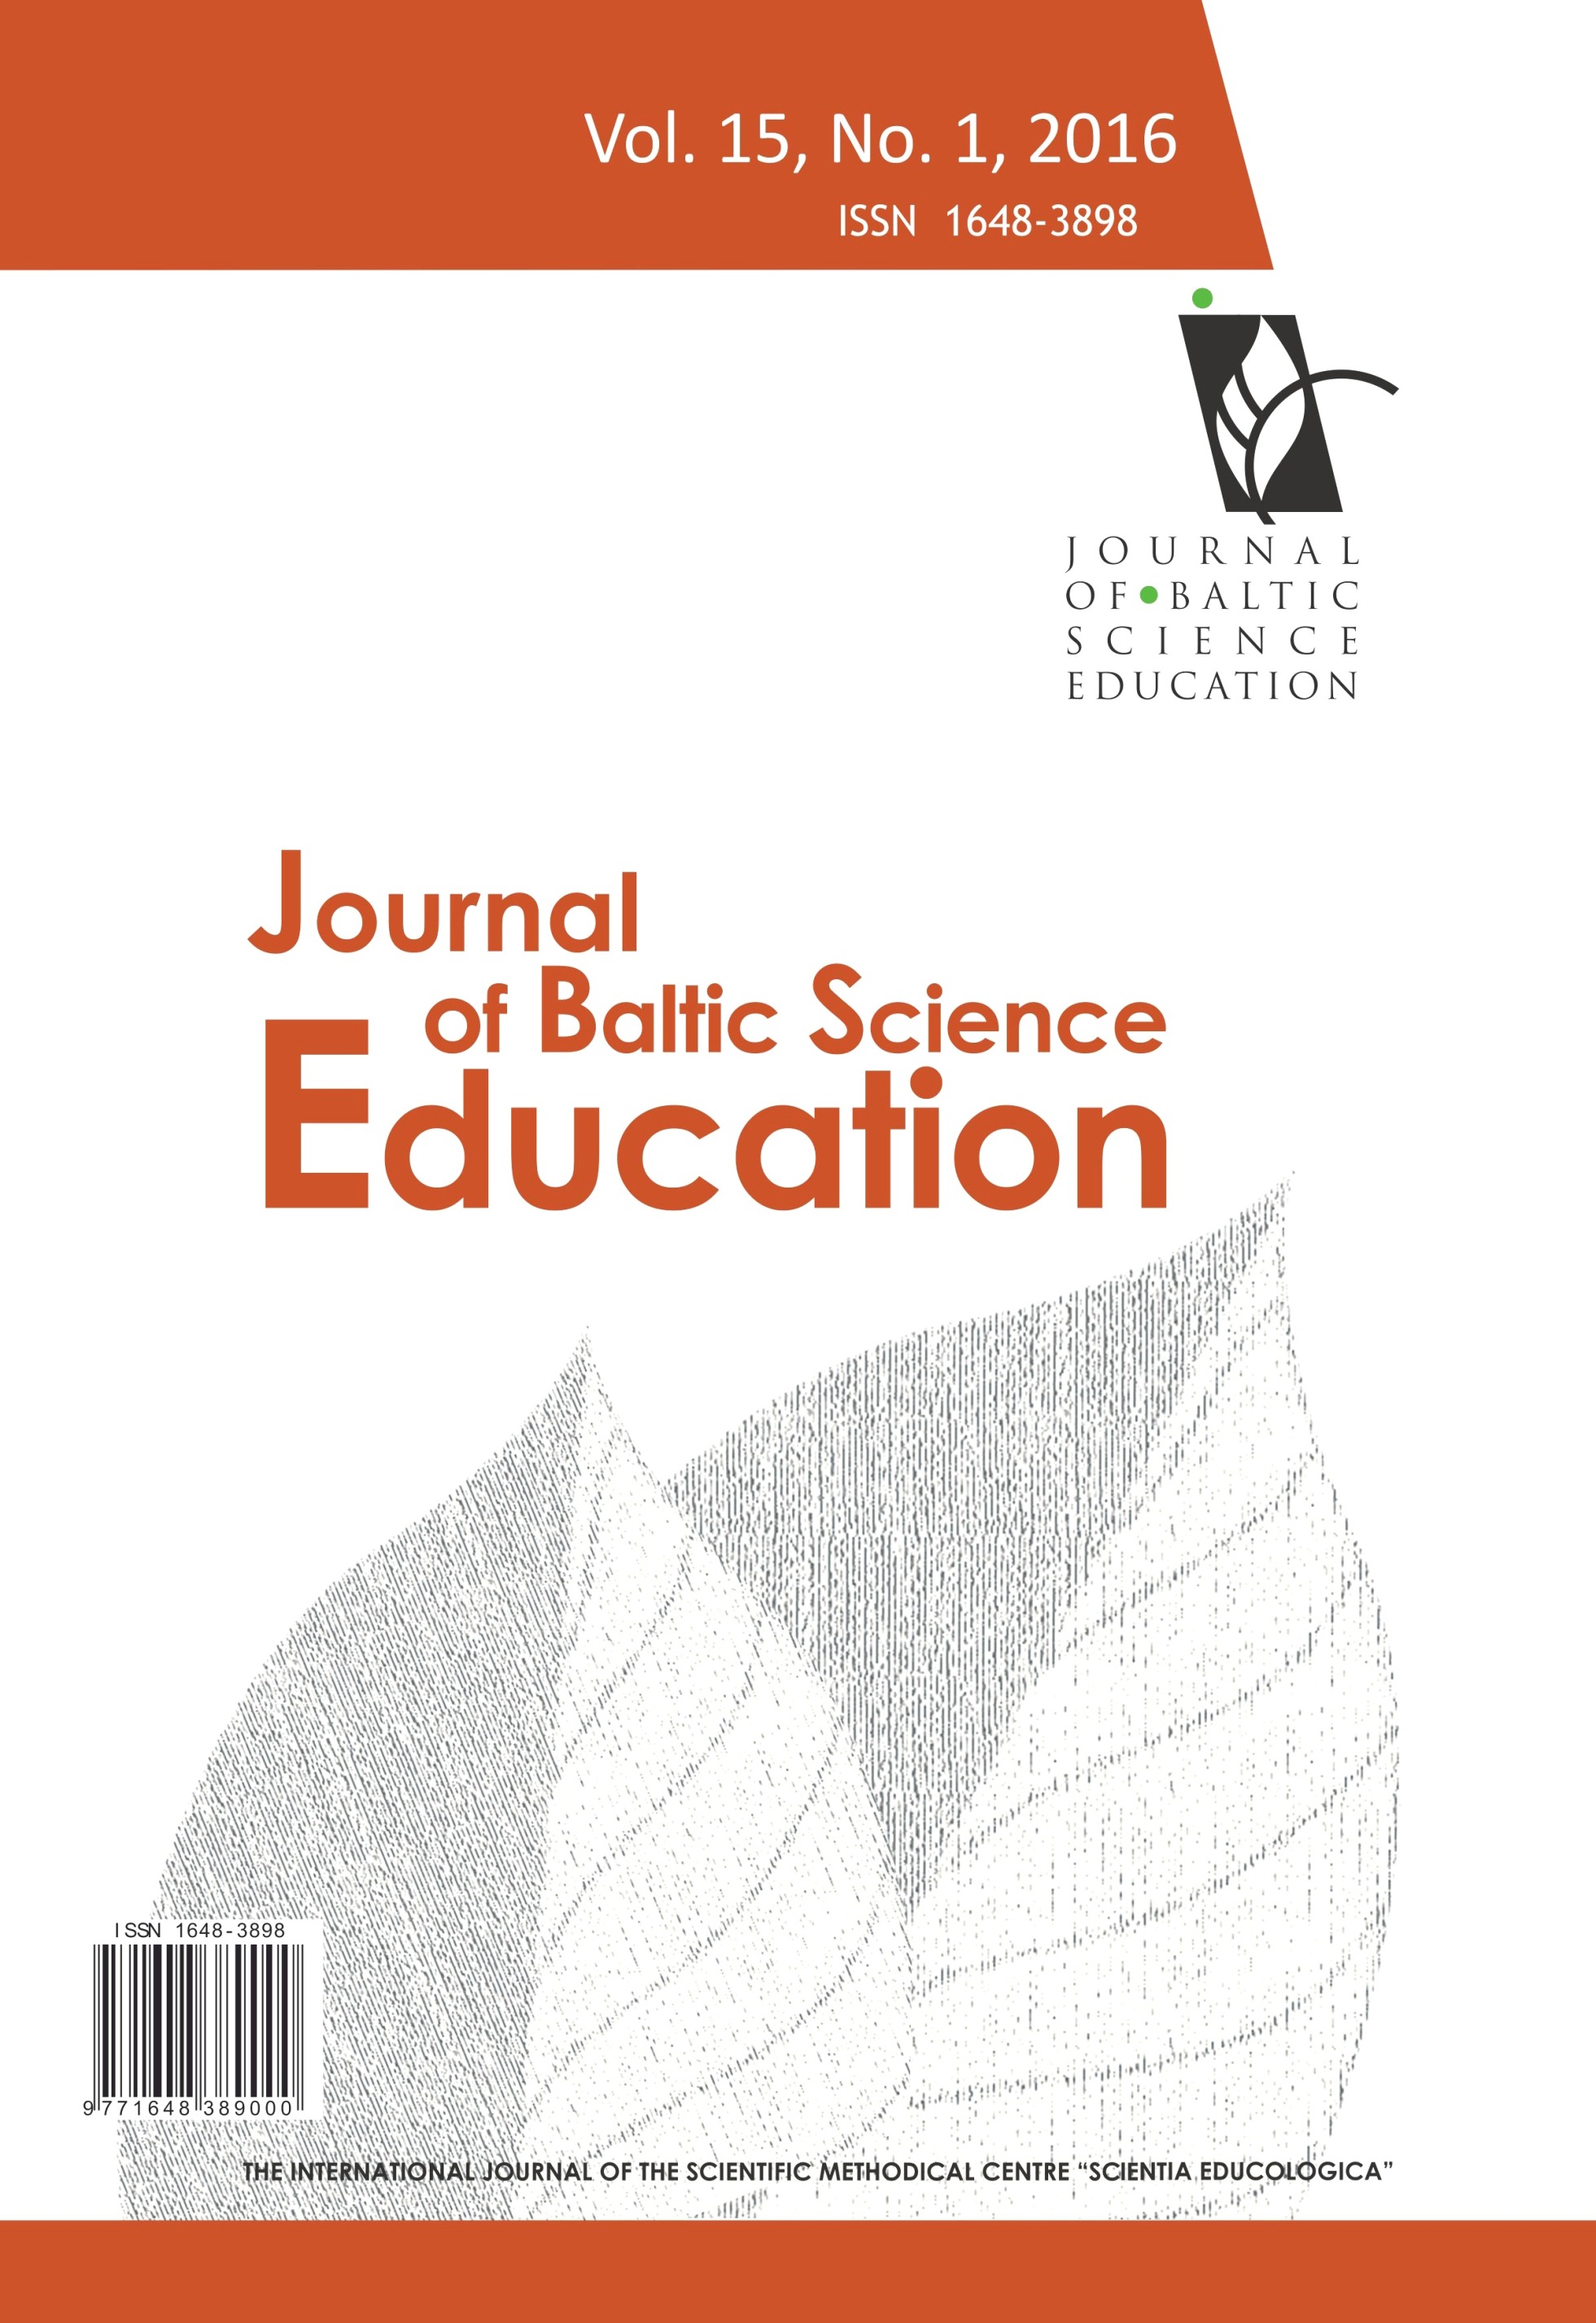 DEVELOPMENT OF A QUESTIONNAIRE TO MEASURE CO-REGULATED LEARNING STRATEGIES DURING COLLABORATIVE SCIENCE LEARNING